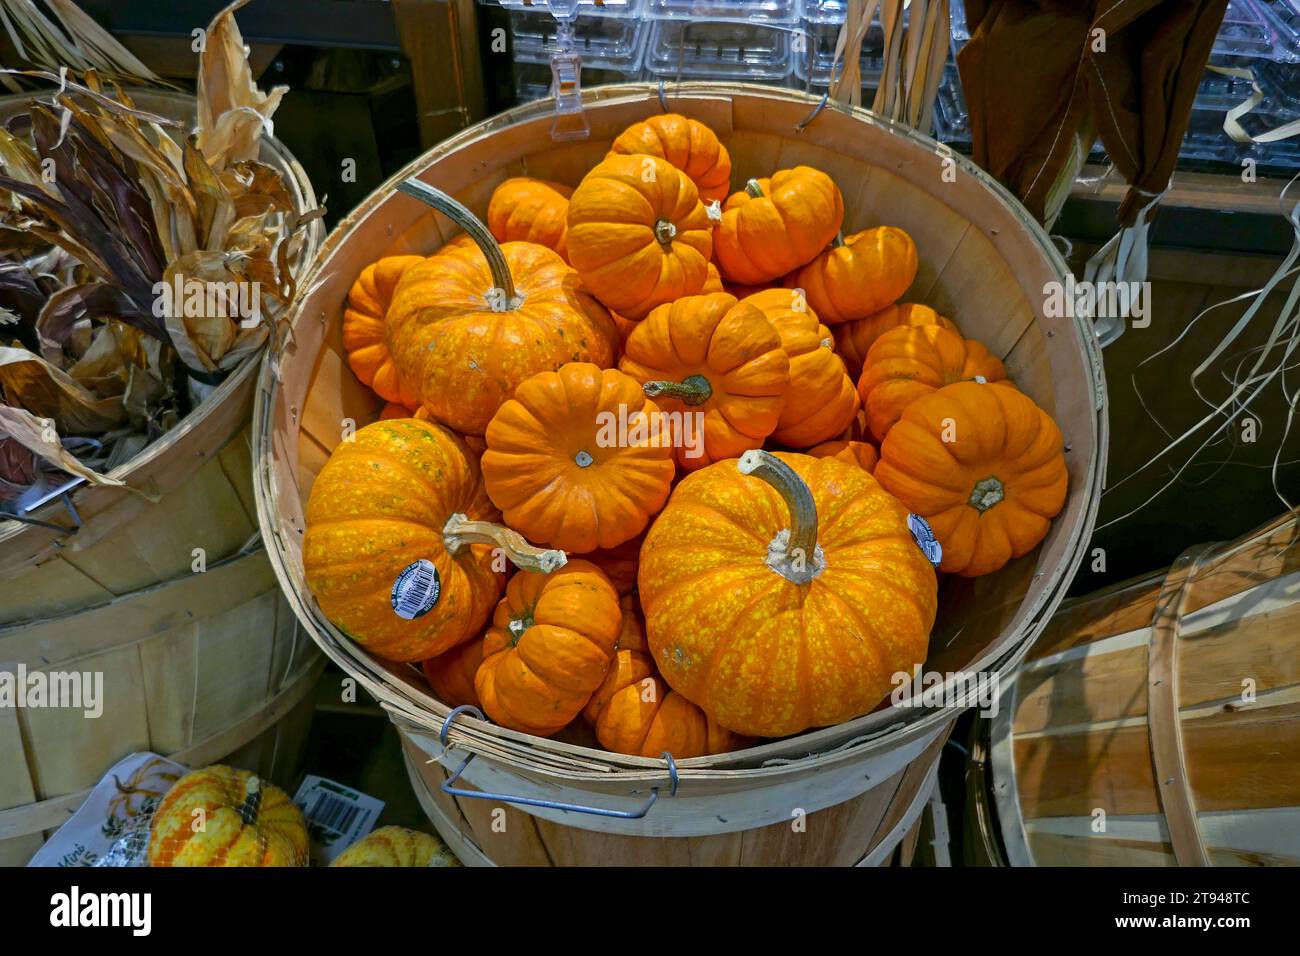 fALL PUMPKIN DISPLAY IN A LOCAL nORTH fLORIDA GROCERY STORE. Stock Photo